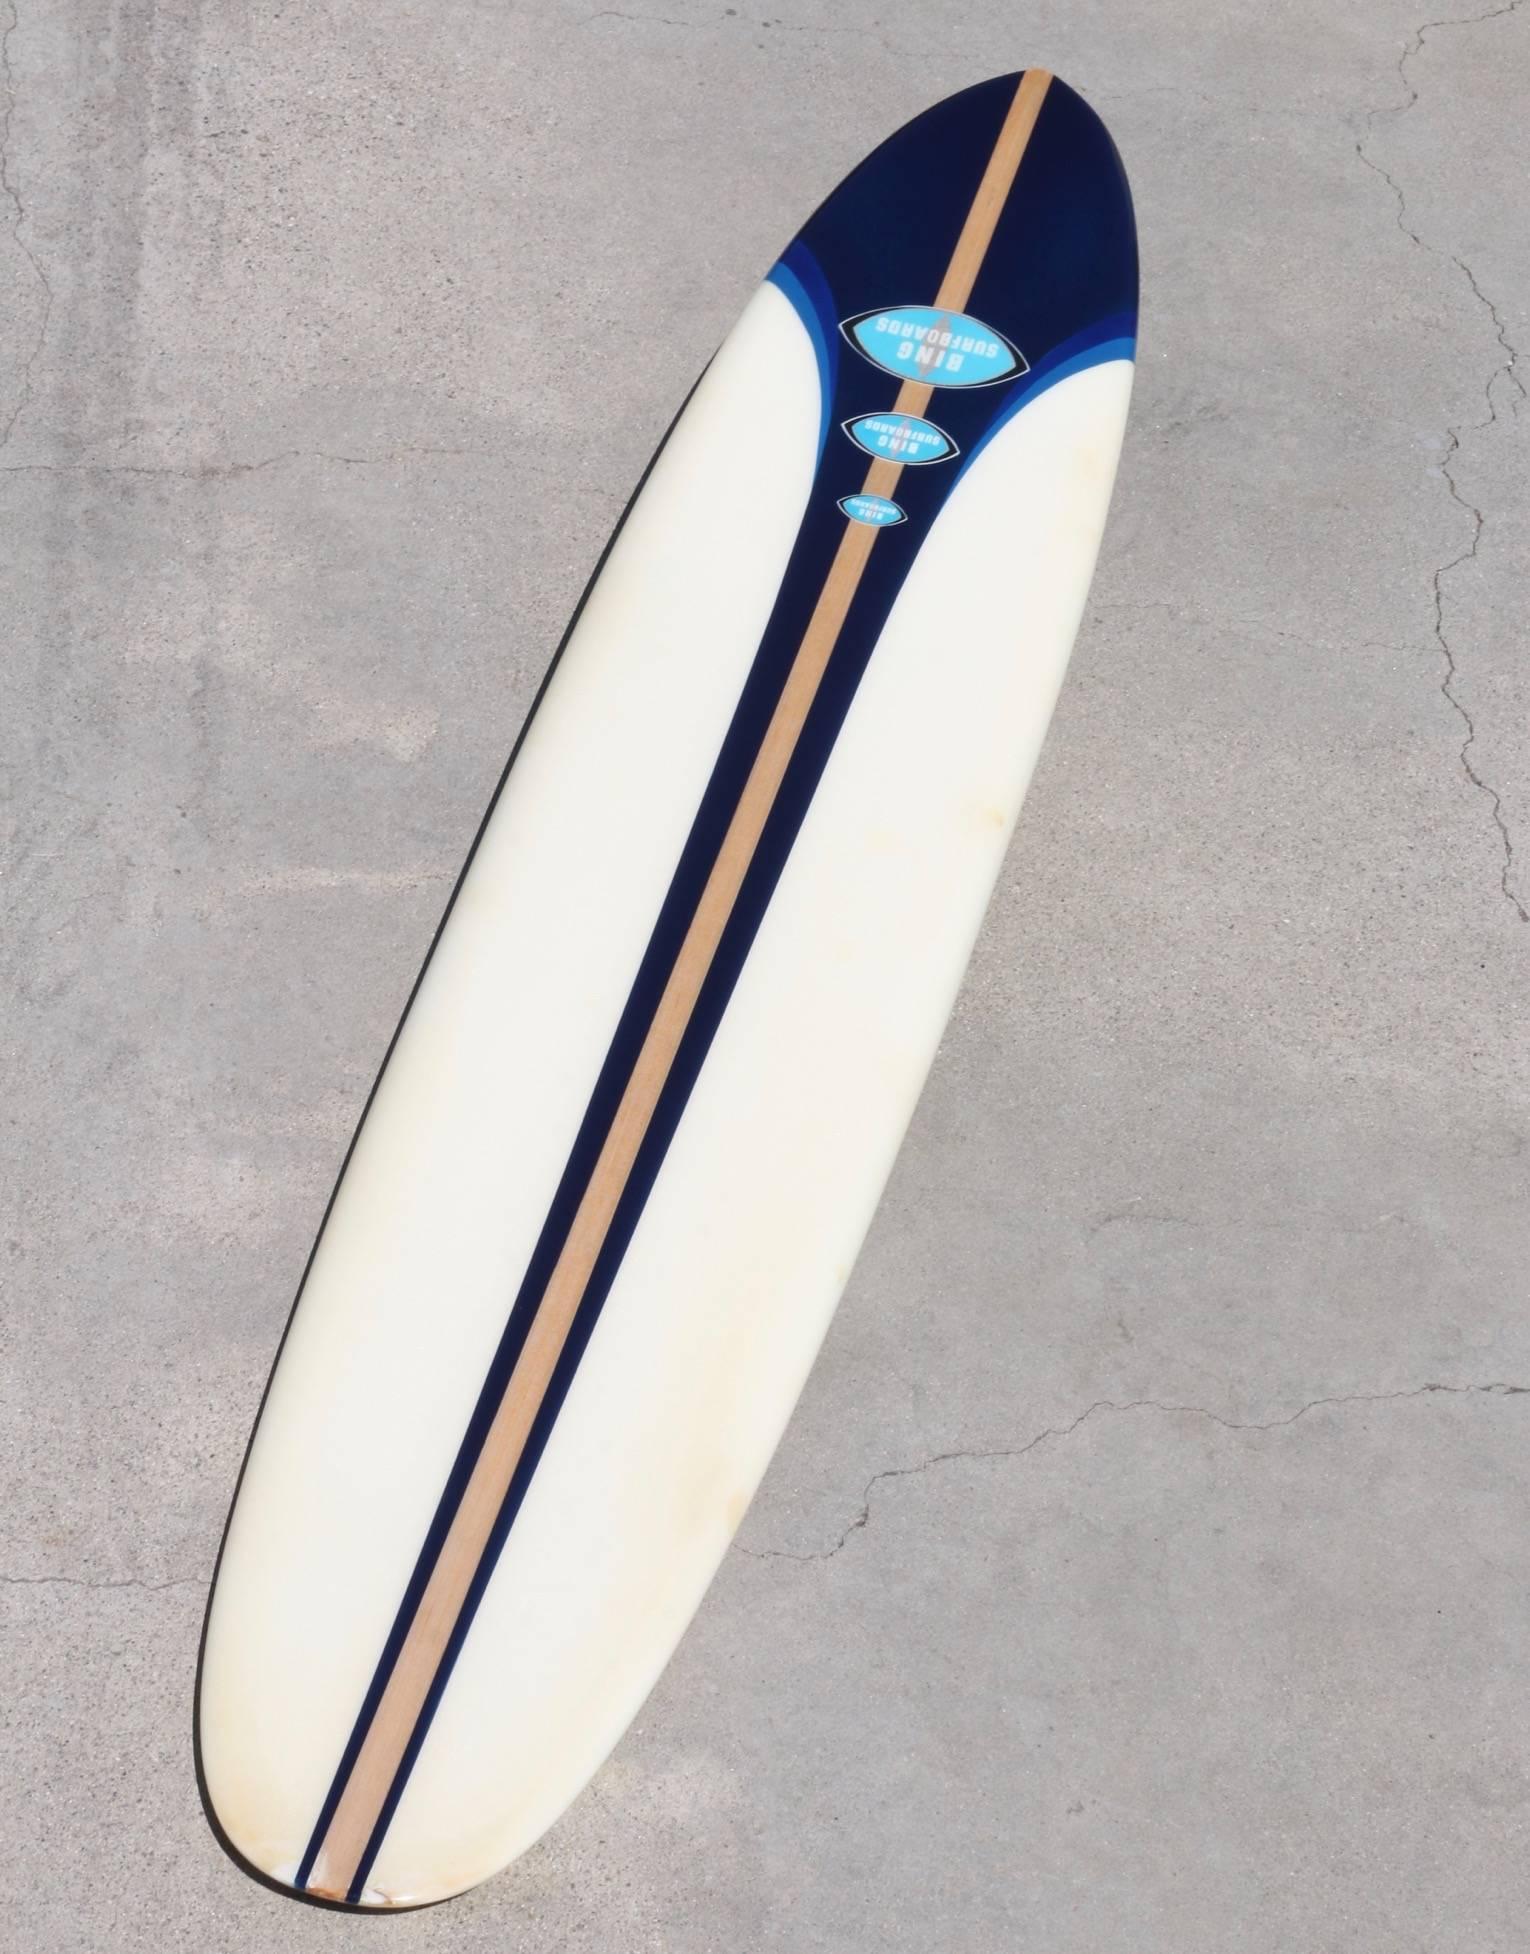 Rare fully restored, triple logo, 1963 bing surfboard. This striking pin-tail board has a 1.5 inch wide balsa stringer and a chop-stick laminated fin. Amazing graphics feature three blue tones set against creamy-white, centered on the balsa stringer